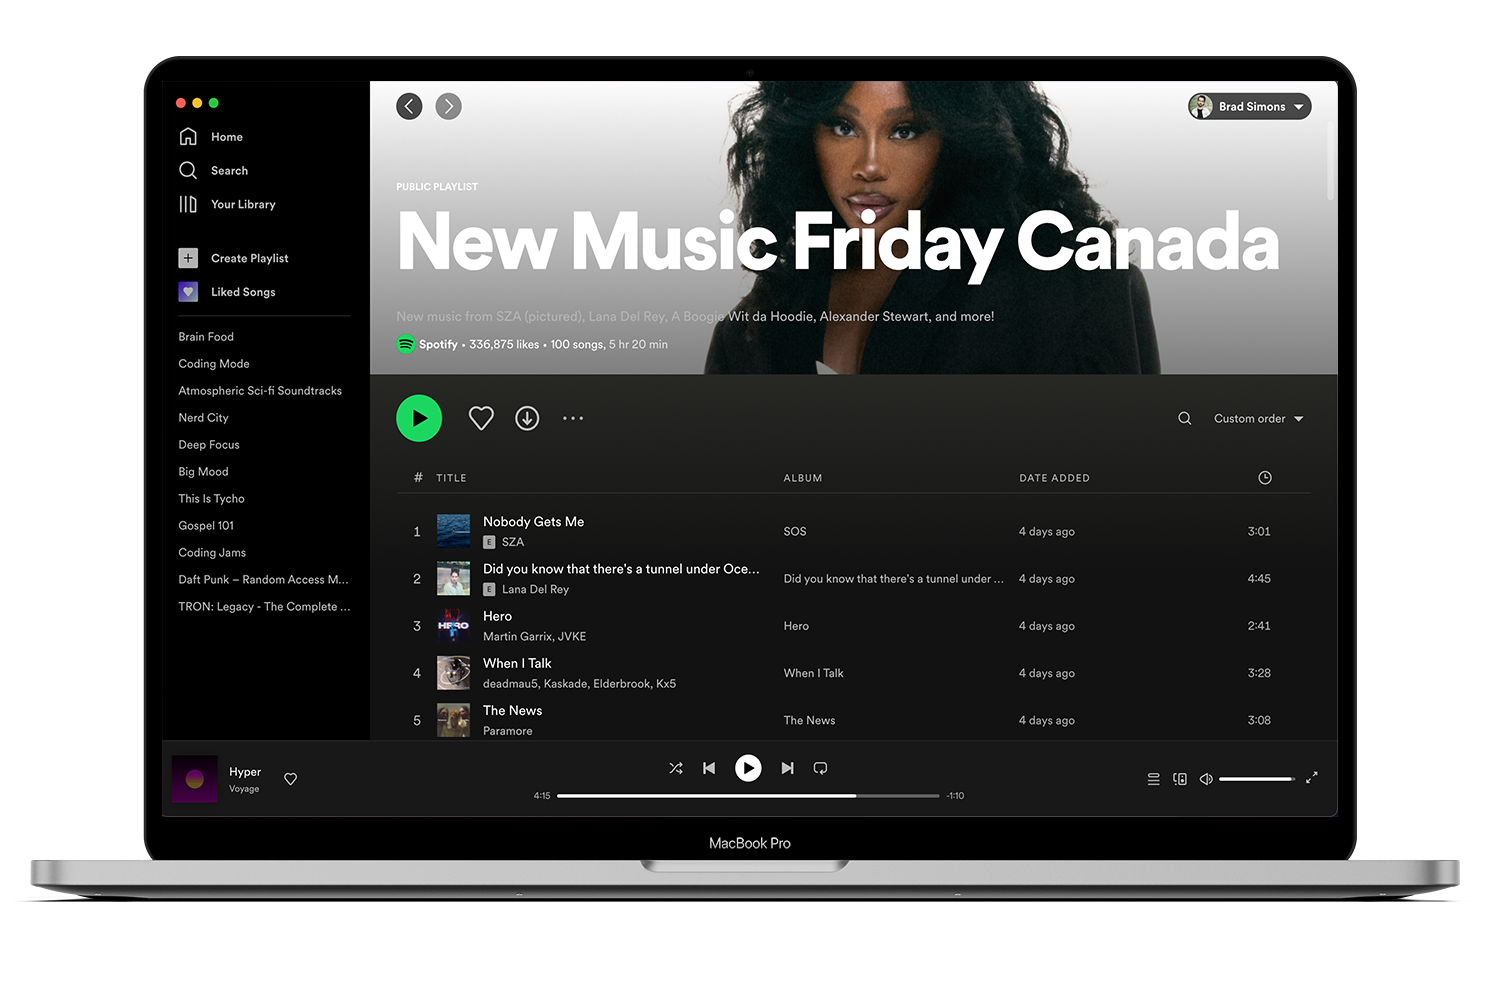 Laptop image with Spotify desktop application open showing the New Music Friday Canada editorial playlist